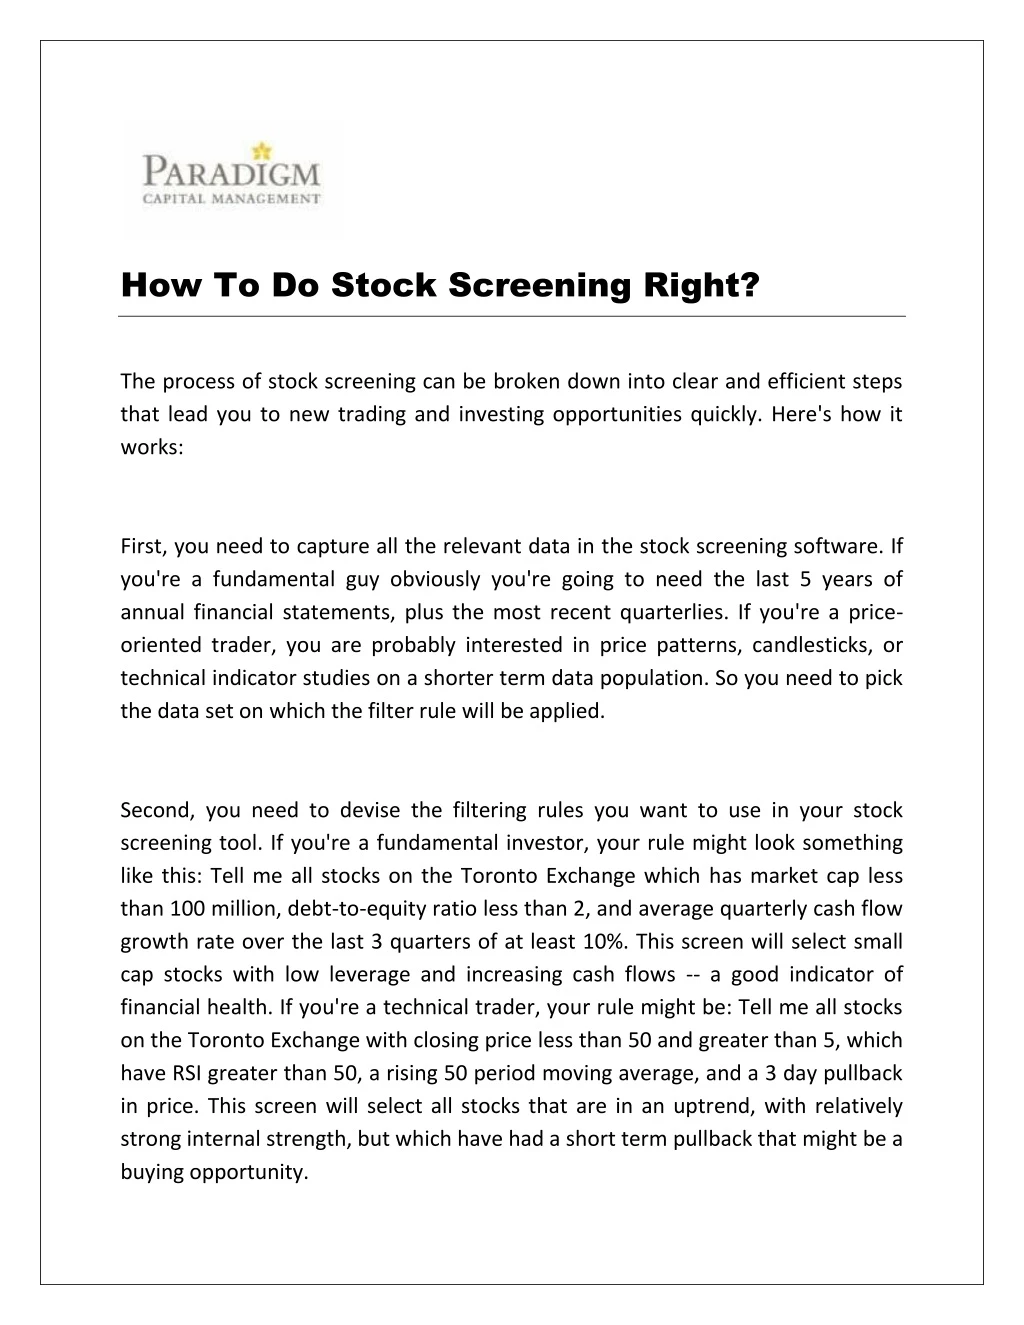 how to do stock screening right